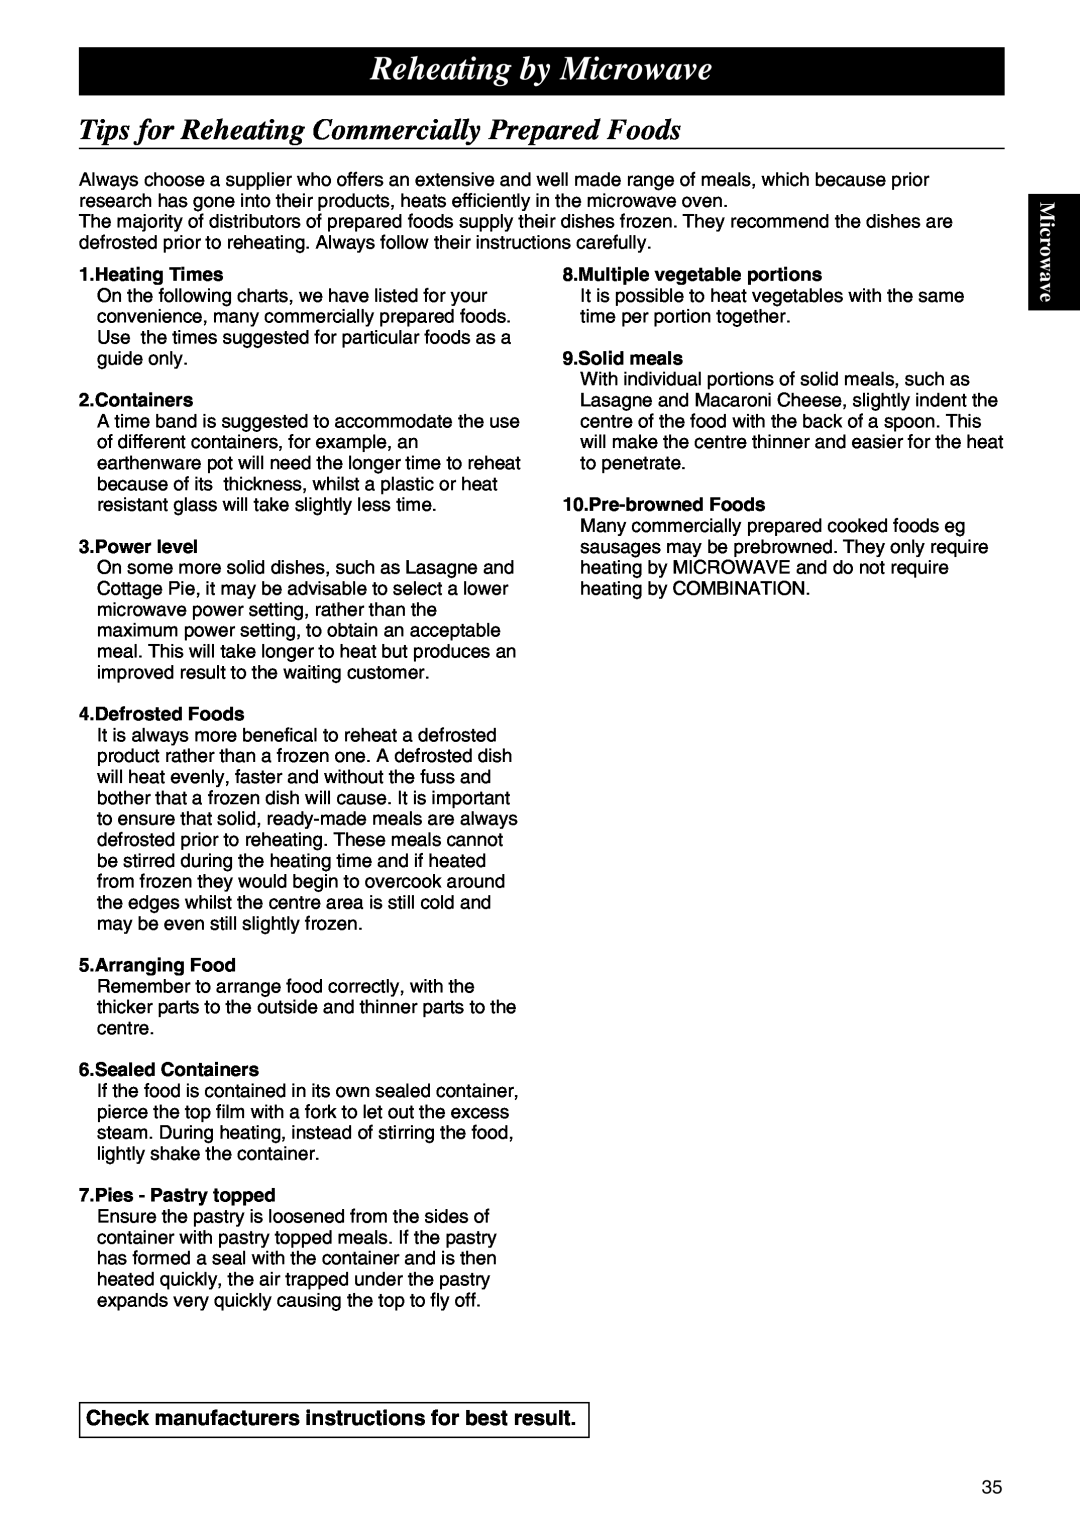 Panasonic NE-C1275 operating instructions Tips for Reheating Commercially Prepared Foods, Reheating by Microwave 